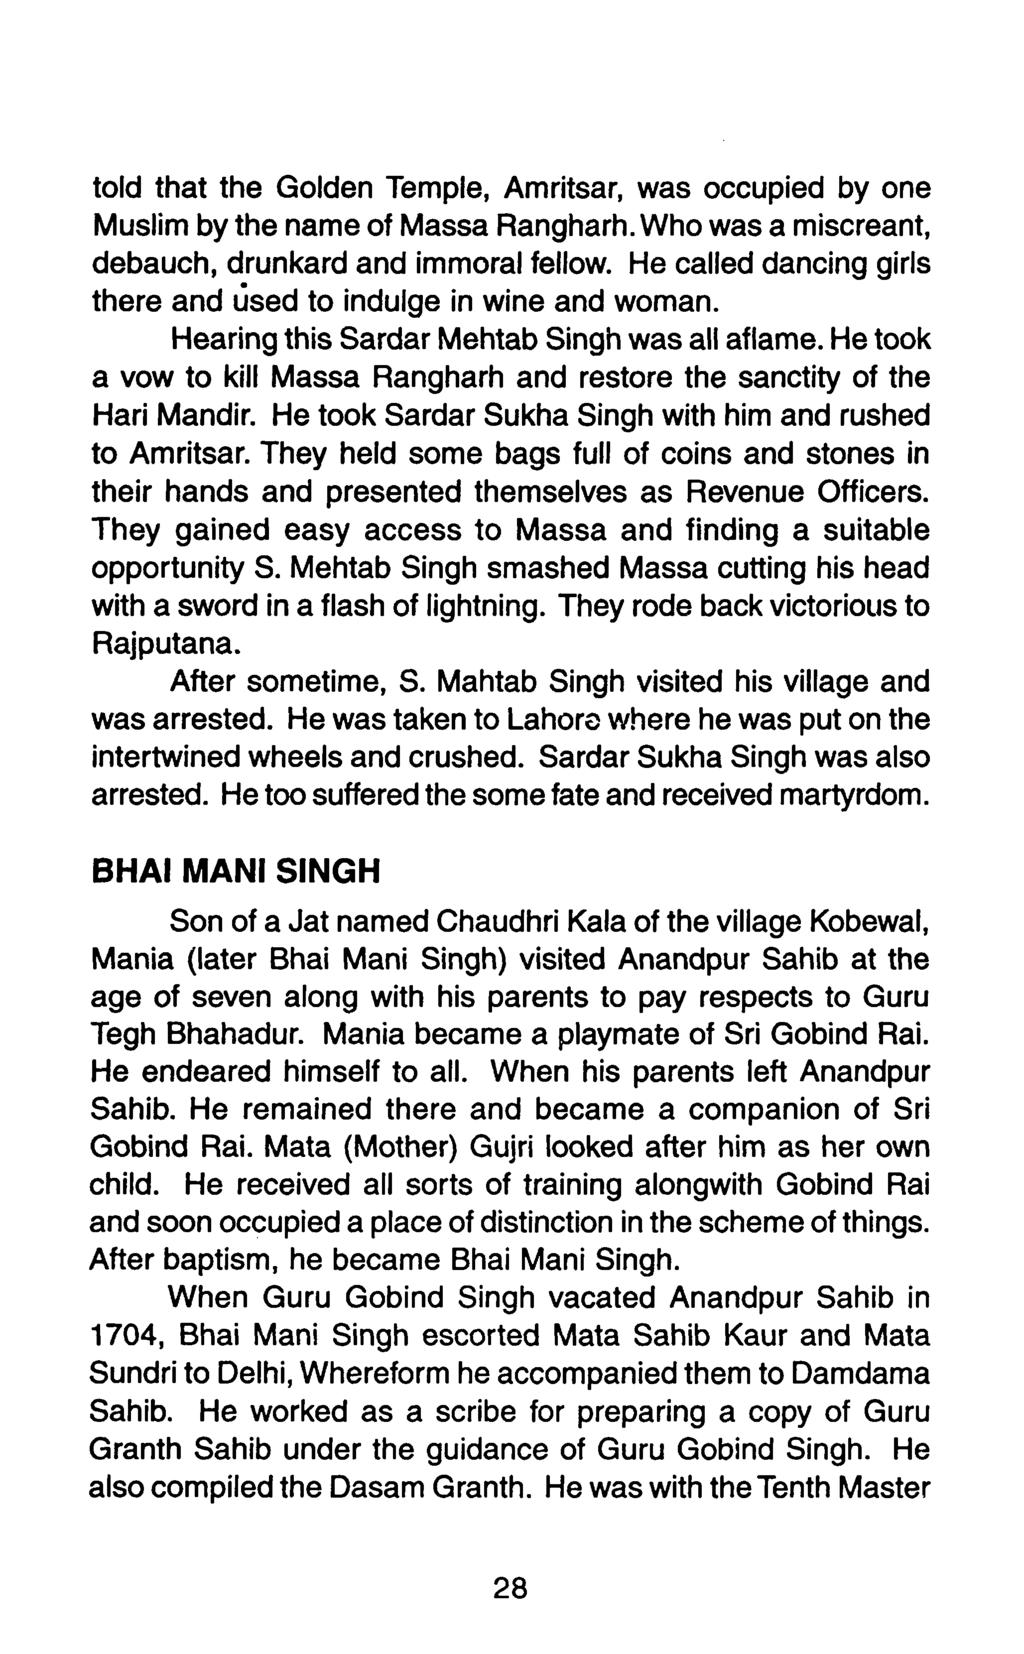 told that the Golden Temple, Amritsar, was occupied by one Muslim by the name of Massa Rangharh. Who was a miscreant, debauch, drunkard and immoral fellow.